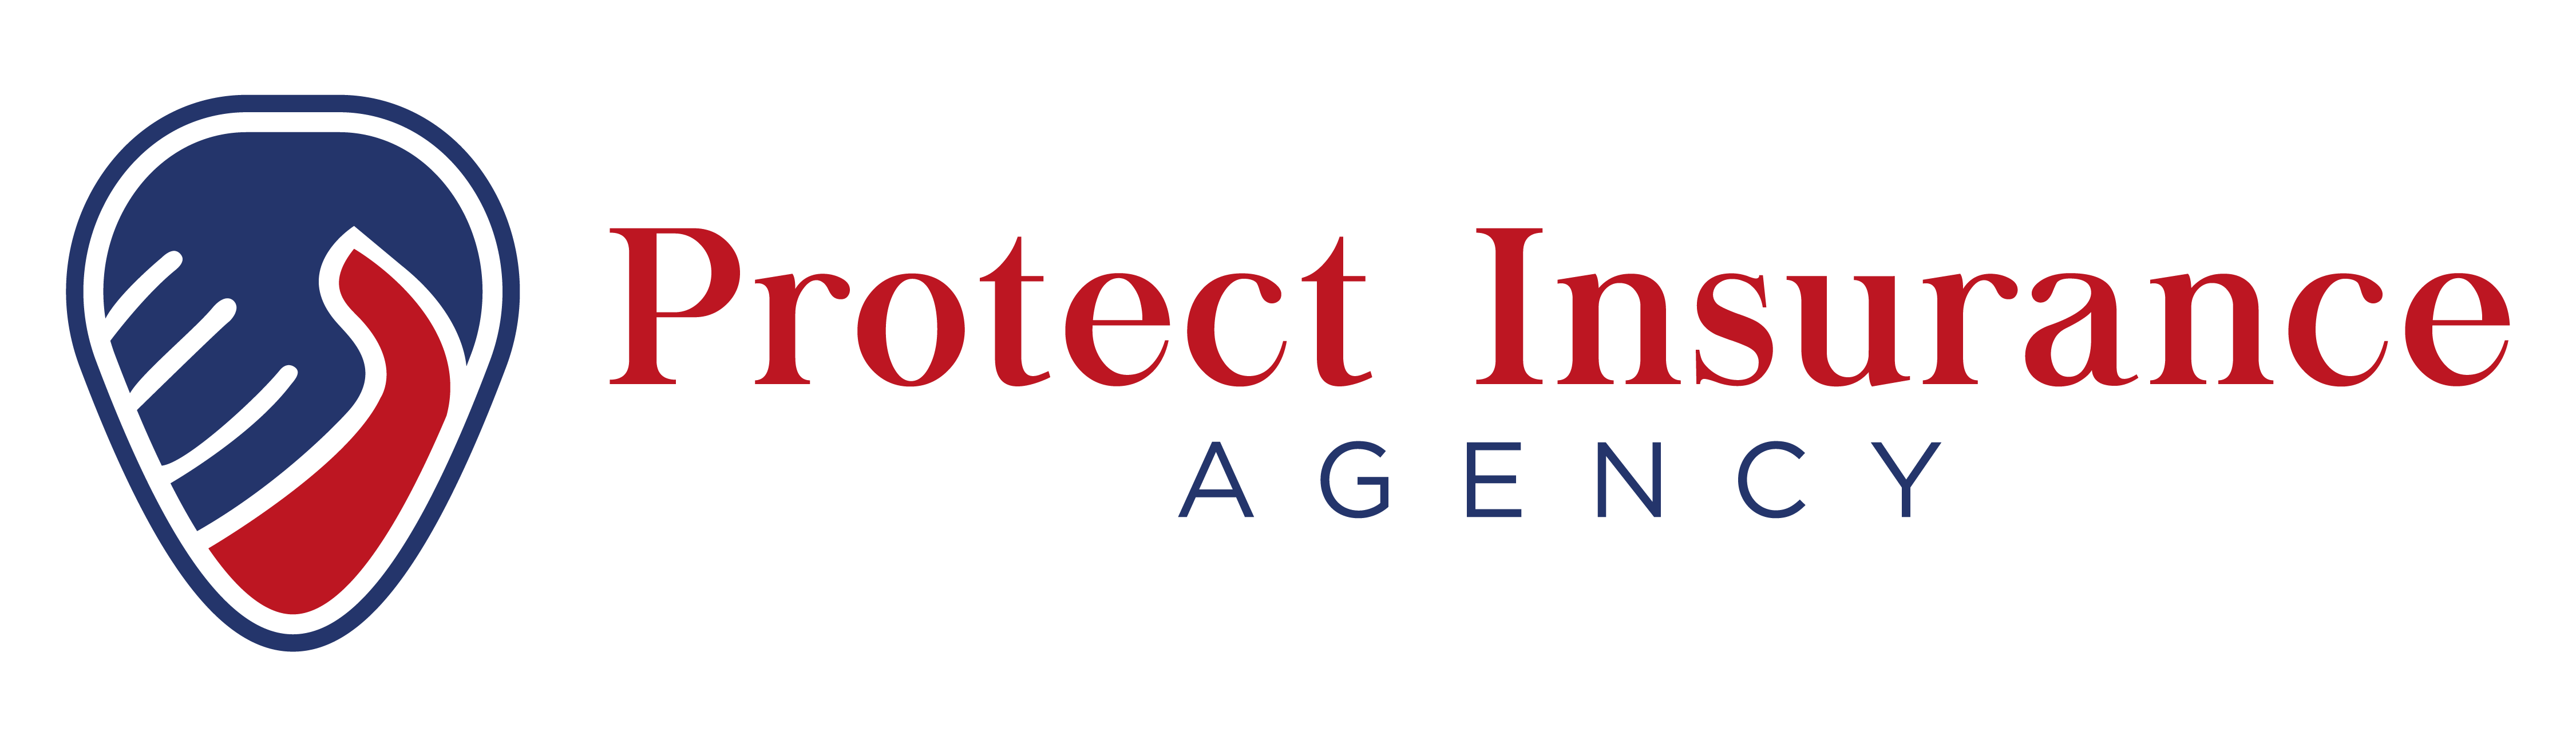 Protect Insurance Agency